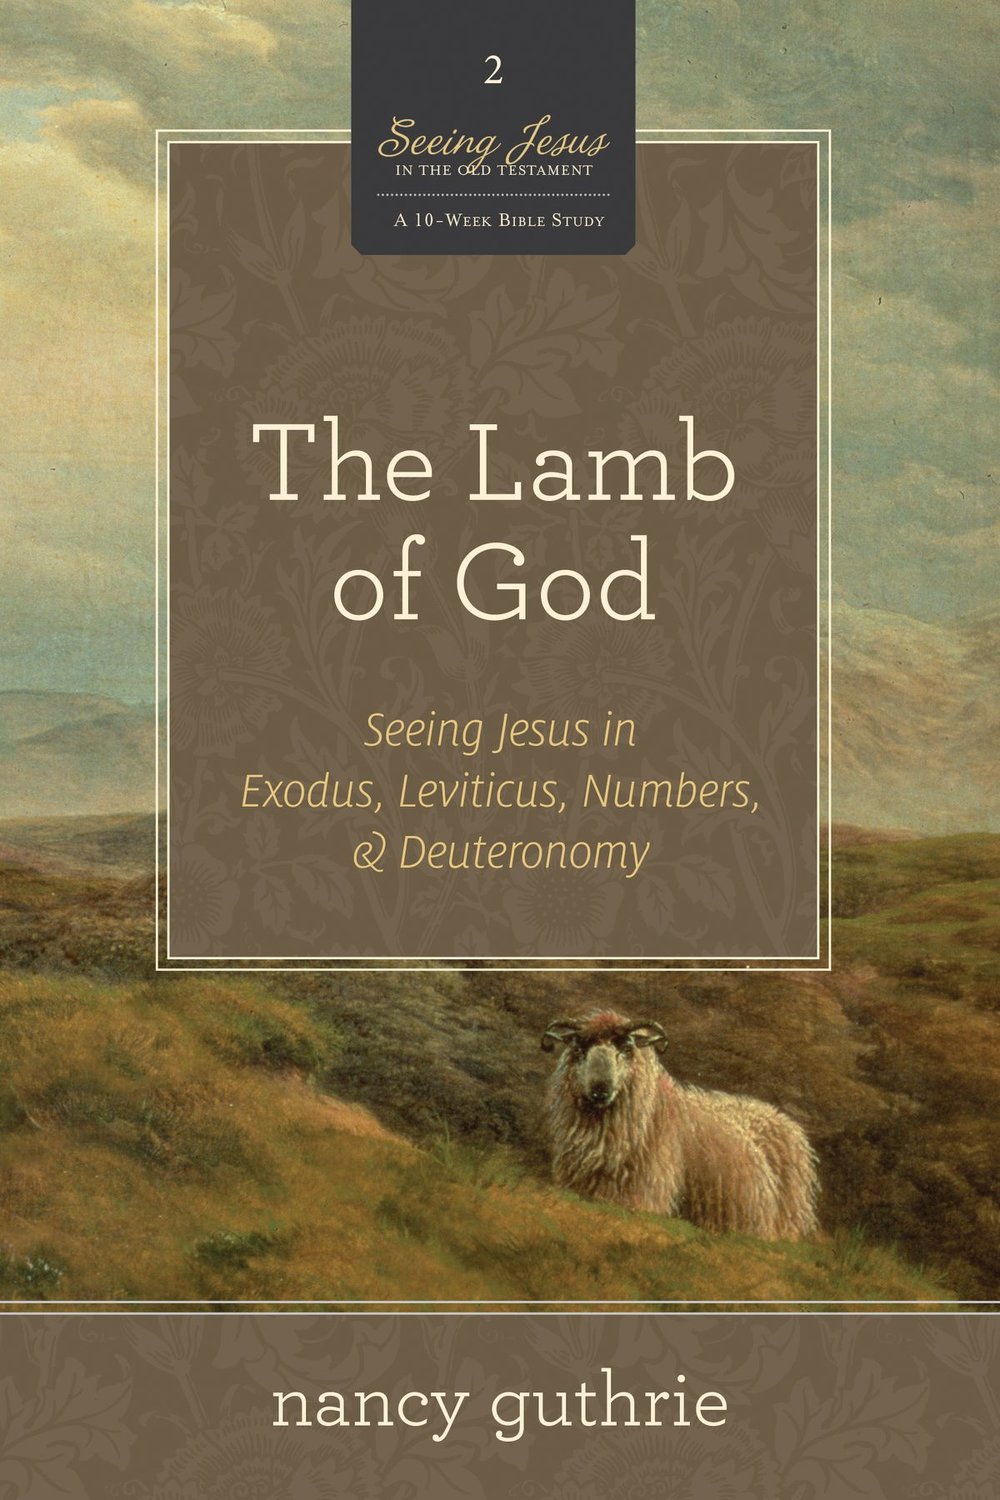 the-lamb-of-god-a-10-week-bible-study-seeing-jesus-in-exodus-leviticus-numbers-and-deuteronomy.jpg